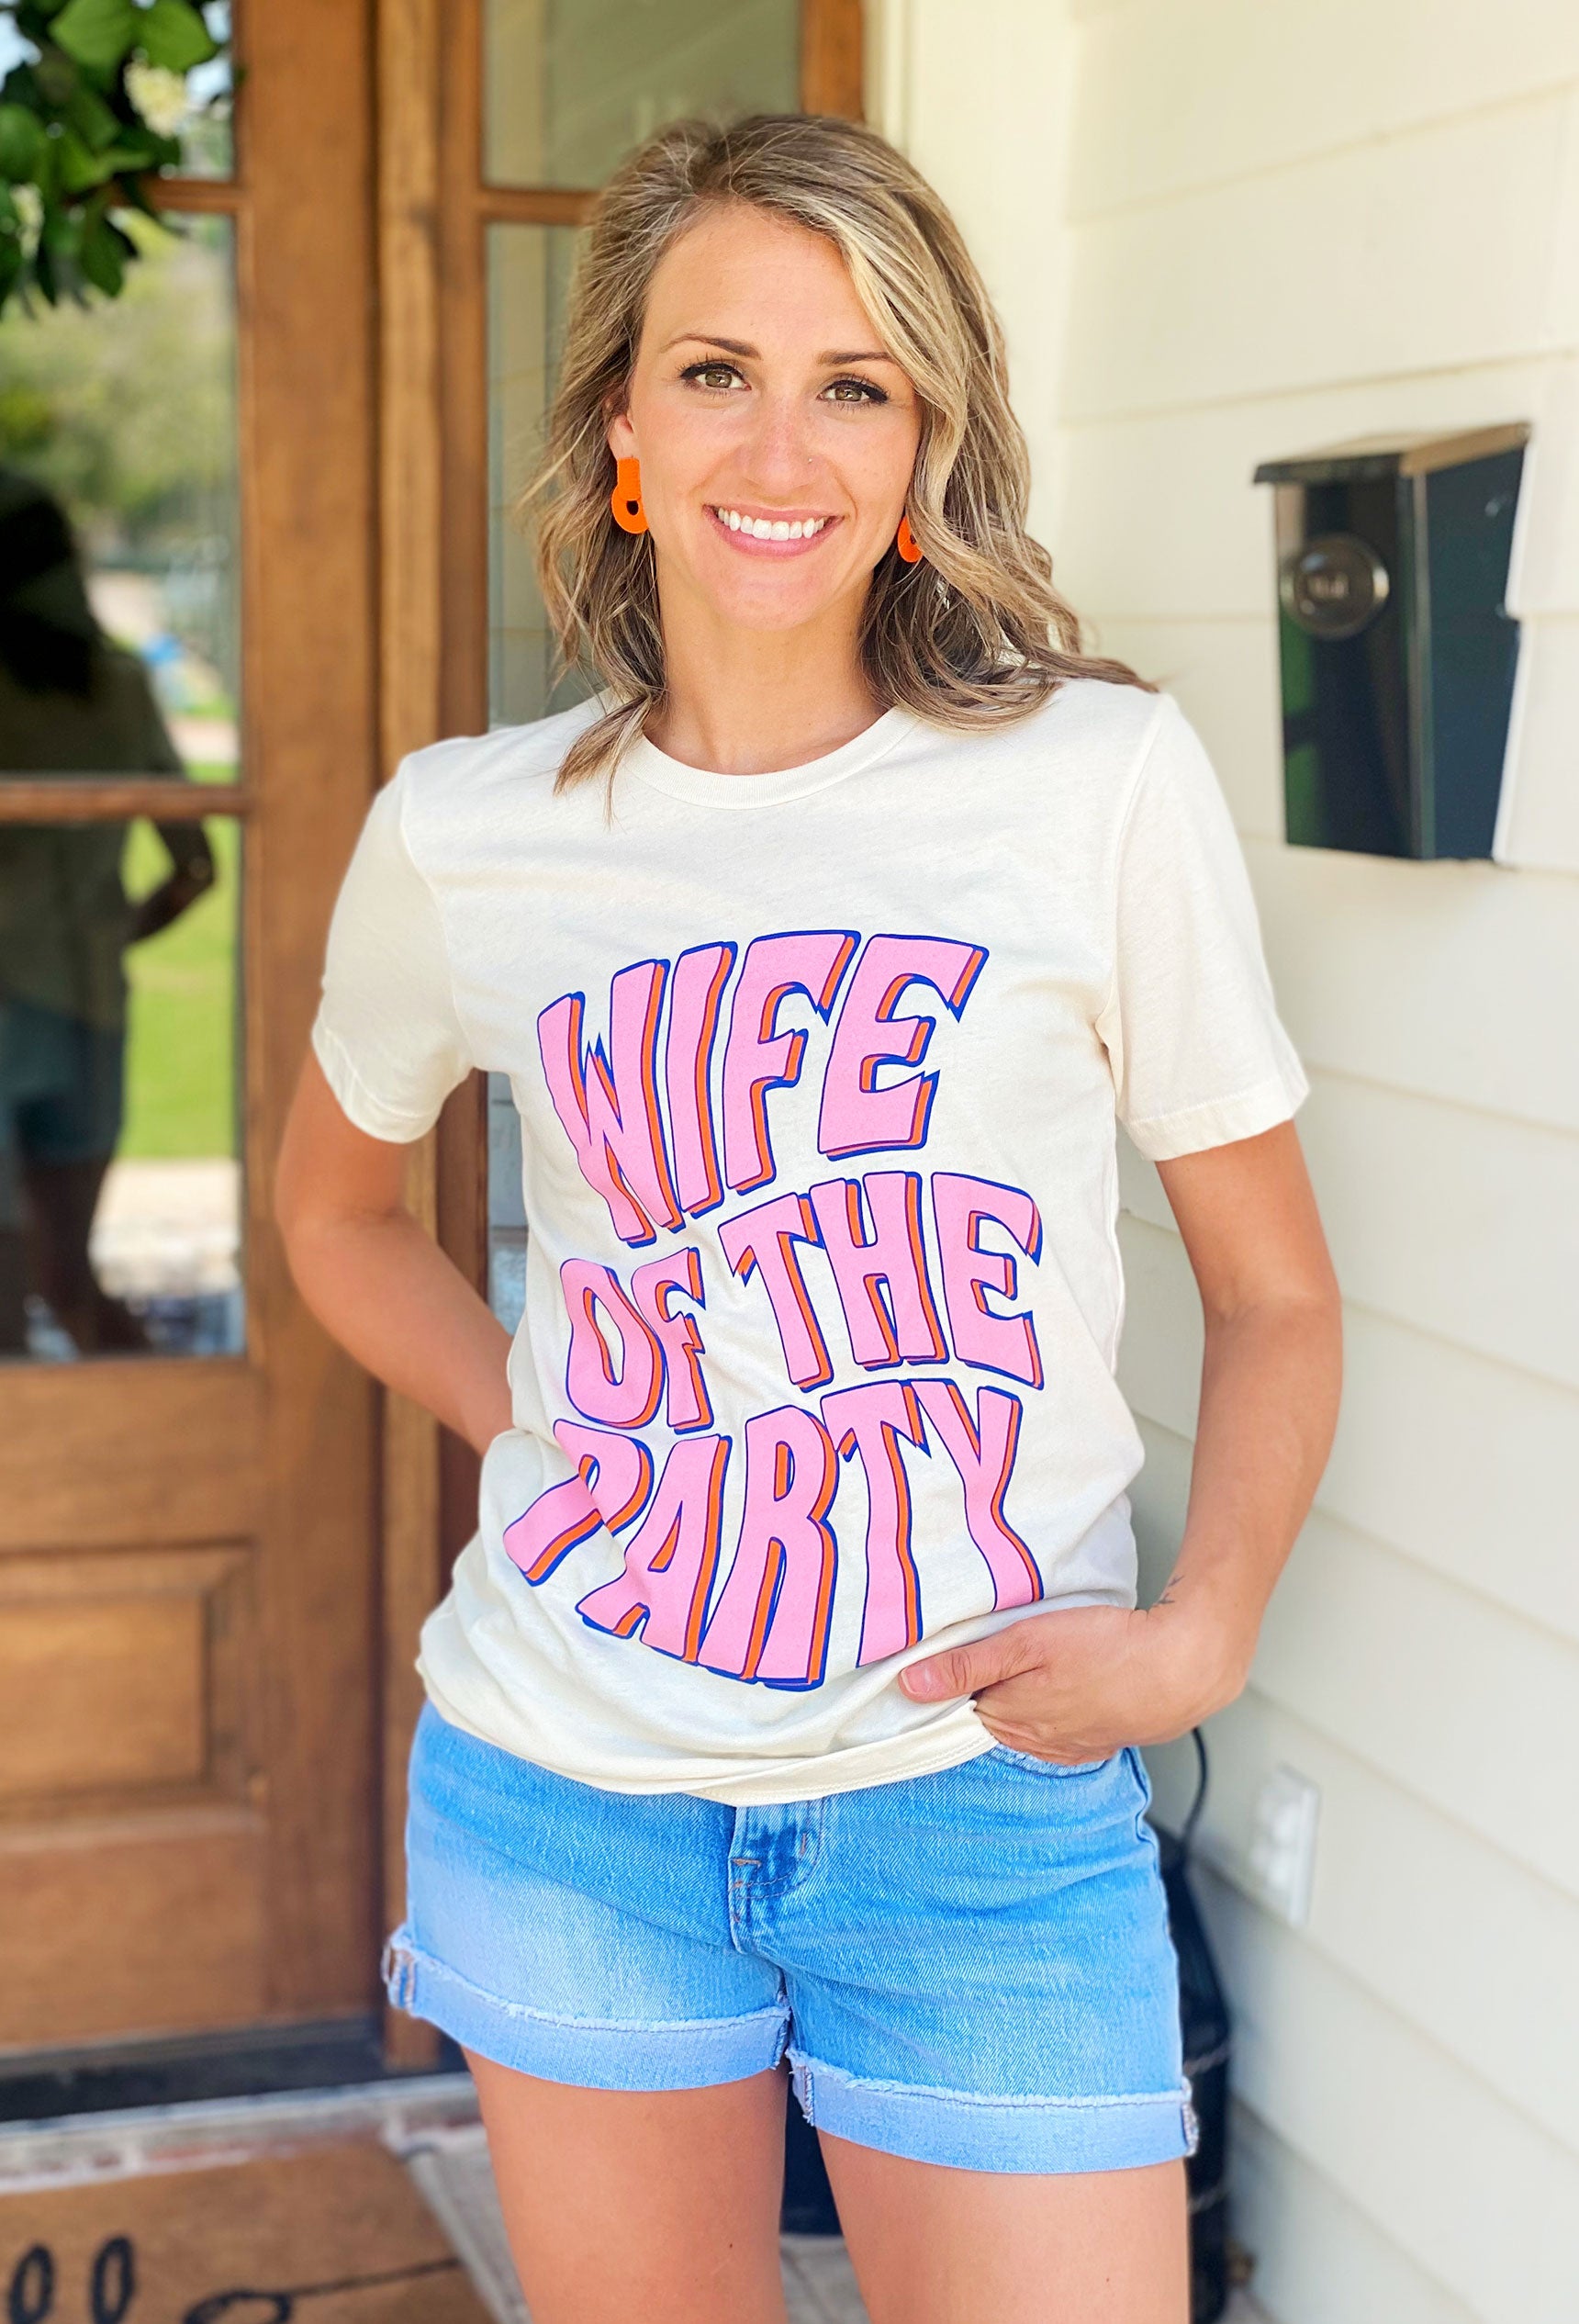 Friday + Saturday: Wife of The Party T-Shirt, cream tee with "Wife of the party" printed on the front of the shirt